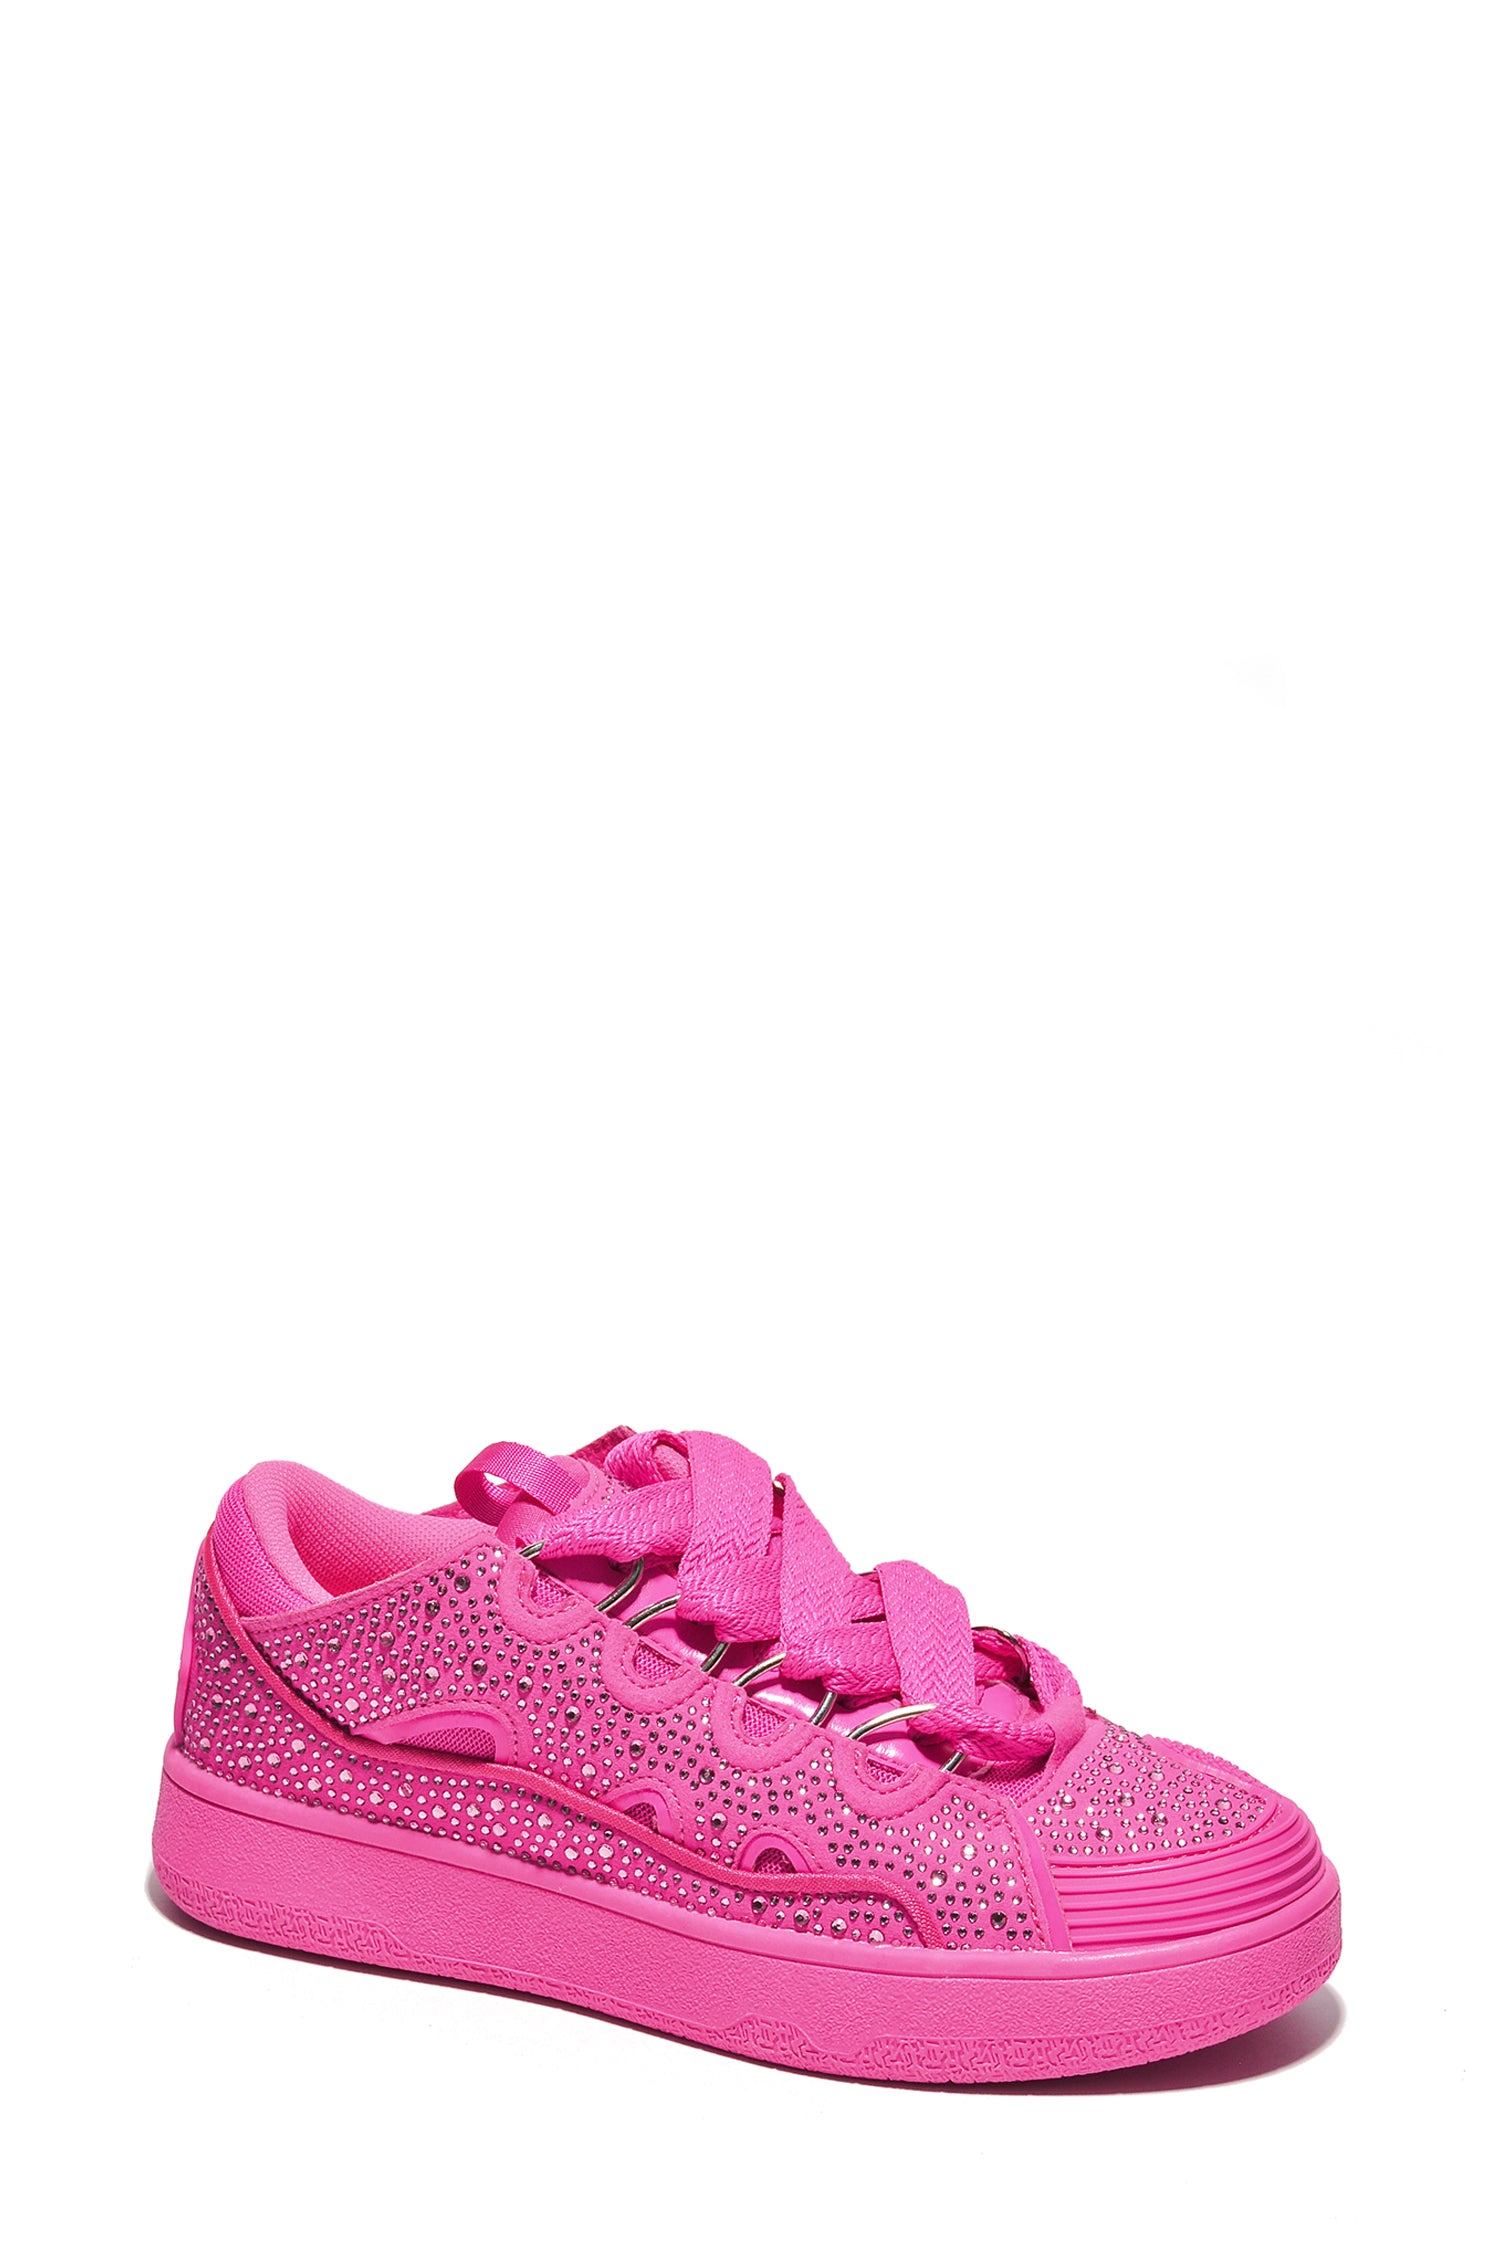 Cape Robbin - MARCY - PINK - SNEAKERS